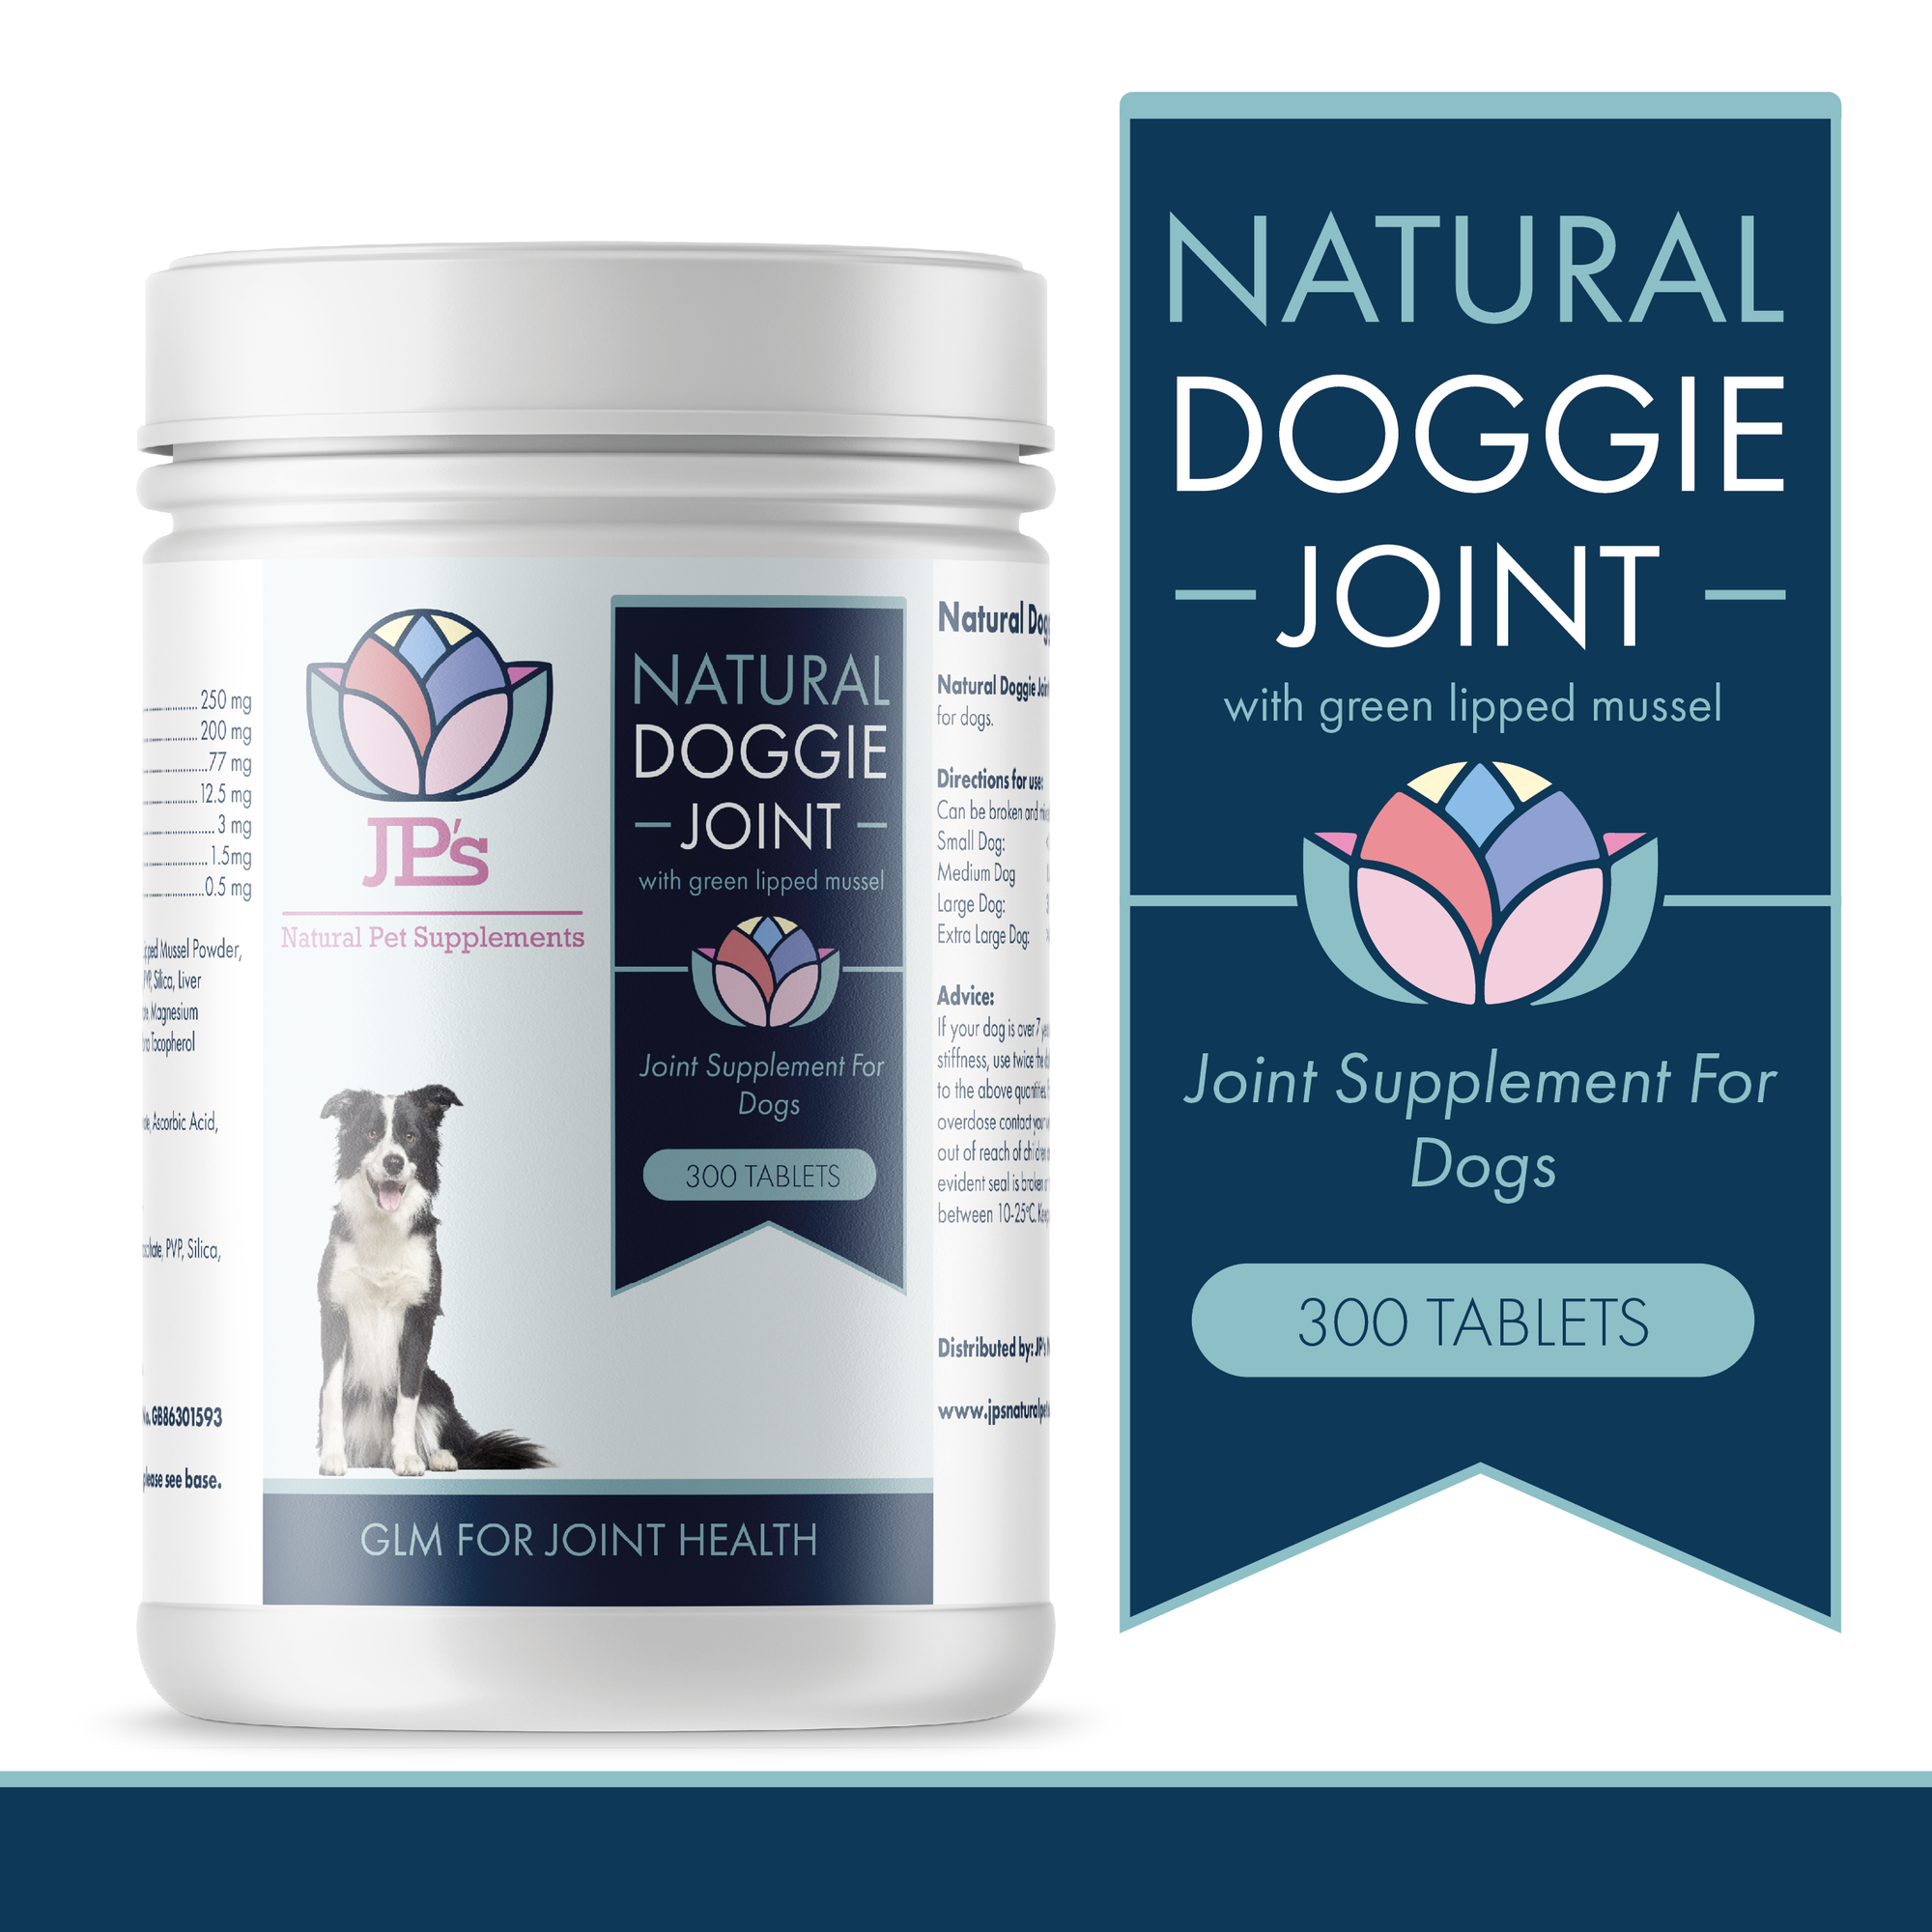 Dog joint supplement with green lipped mussel 